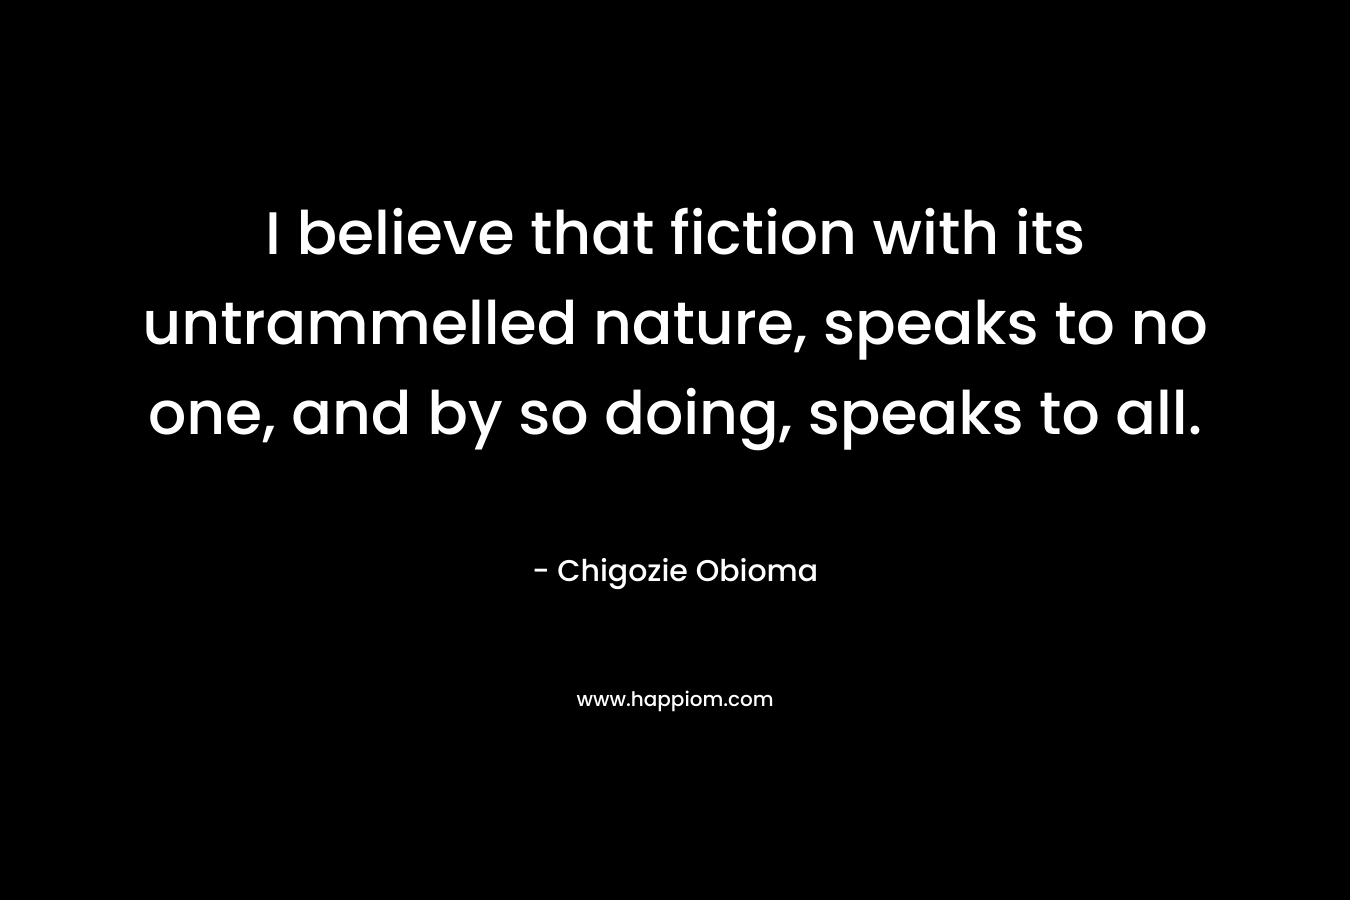 I believe that fiction with its untrammelled nature, speaks to no one, and by so doing, speaks to all. – Chigozie Obioma